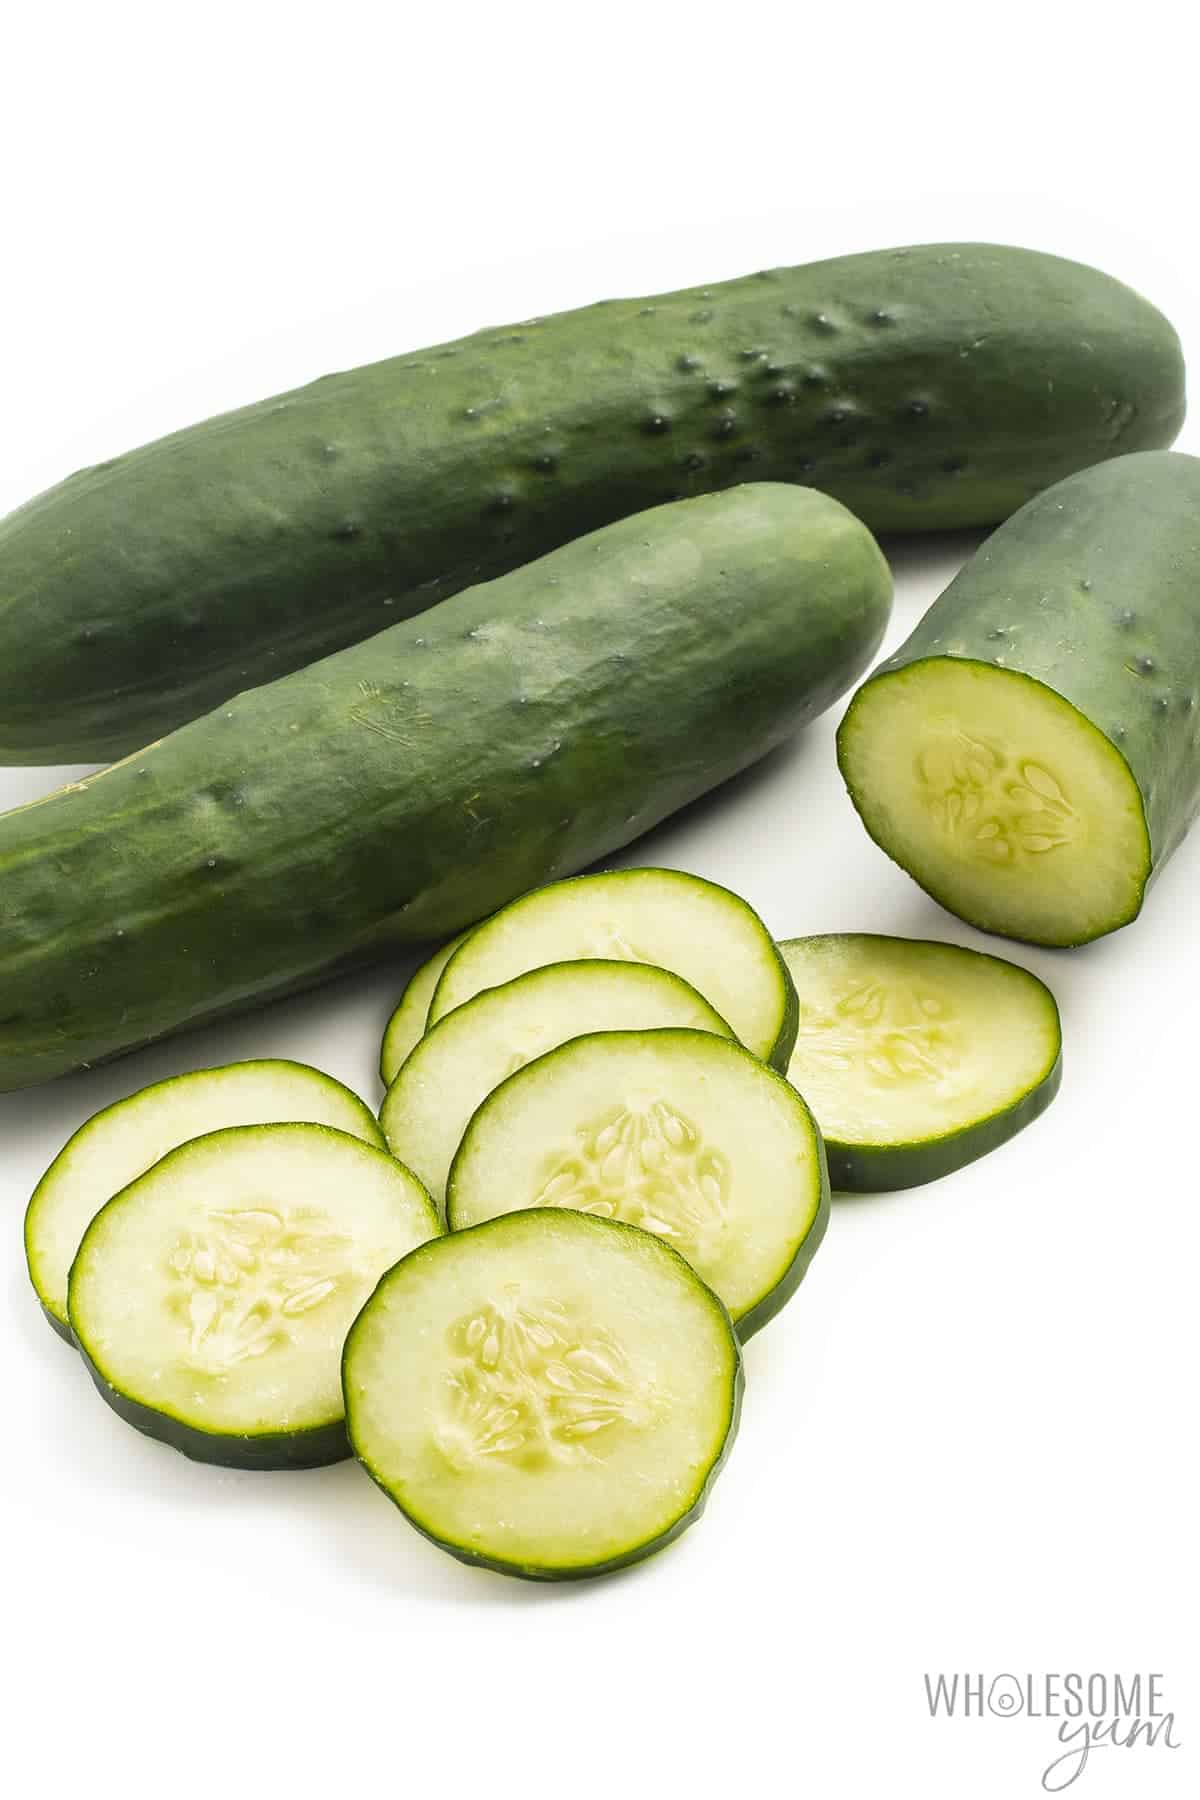 Are cucumber carbs high? These fresh sliced cucumbers are low in carbs.